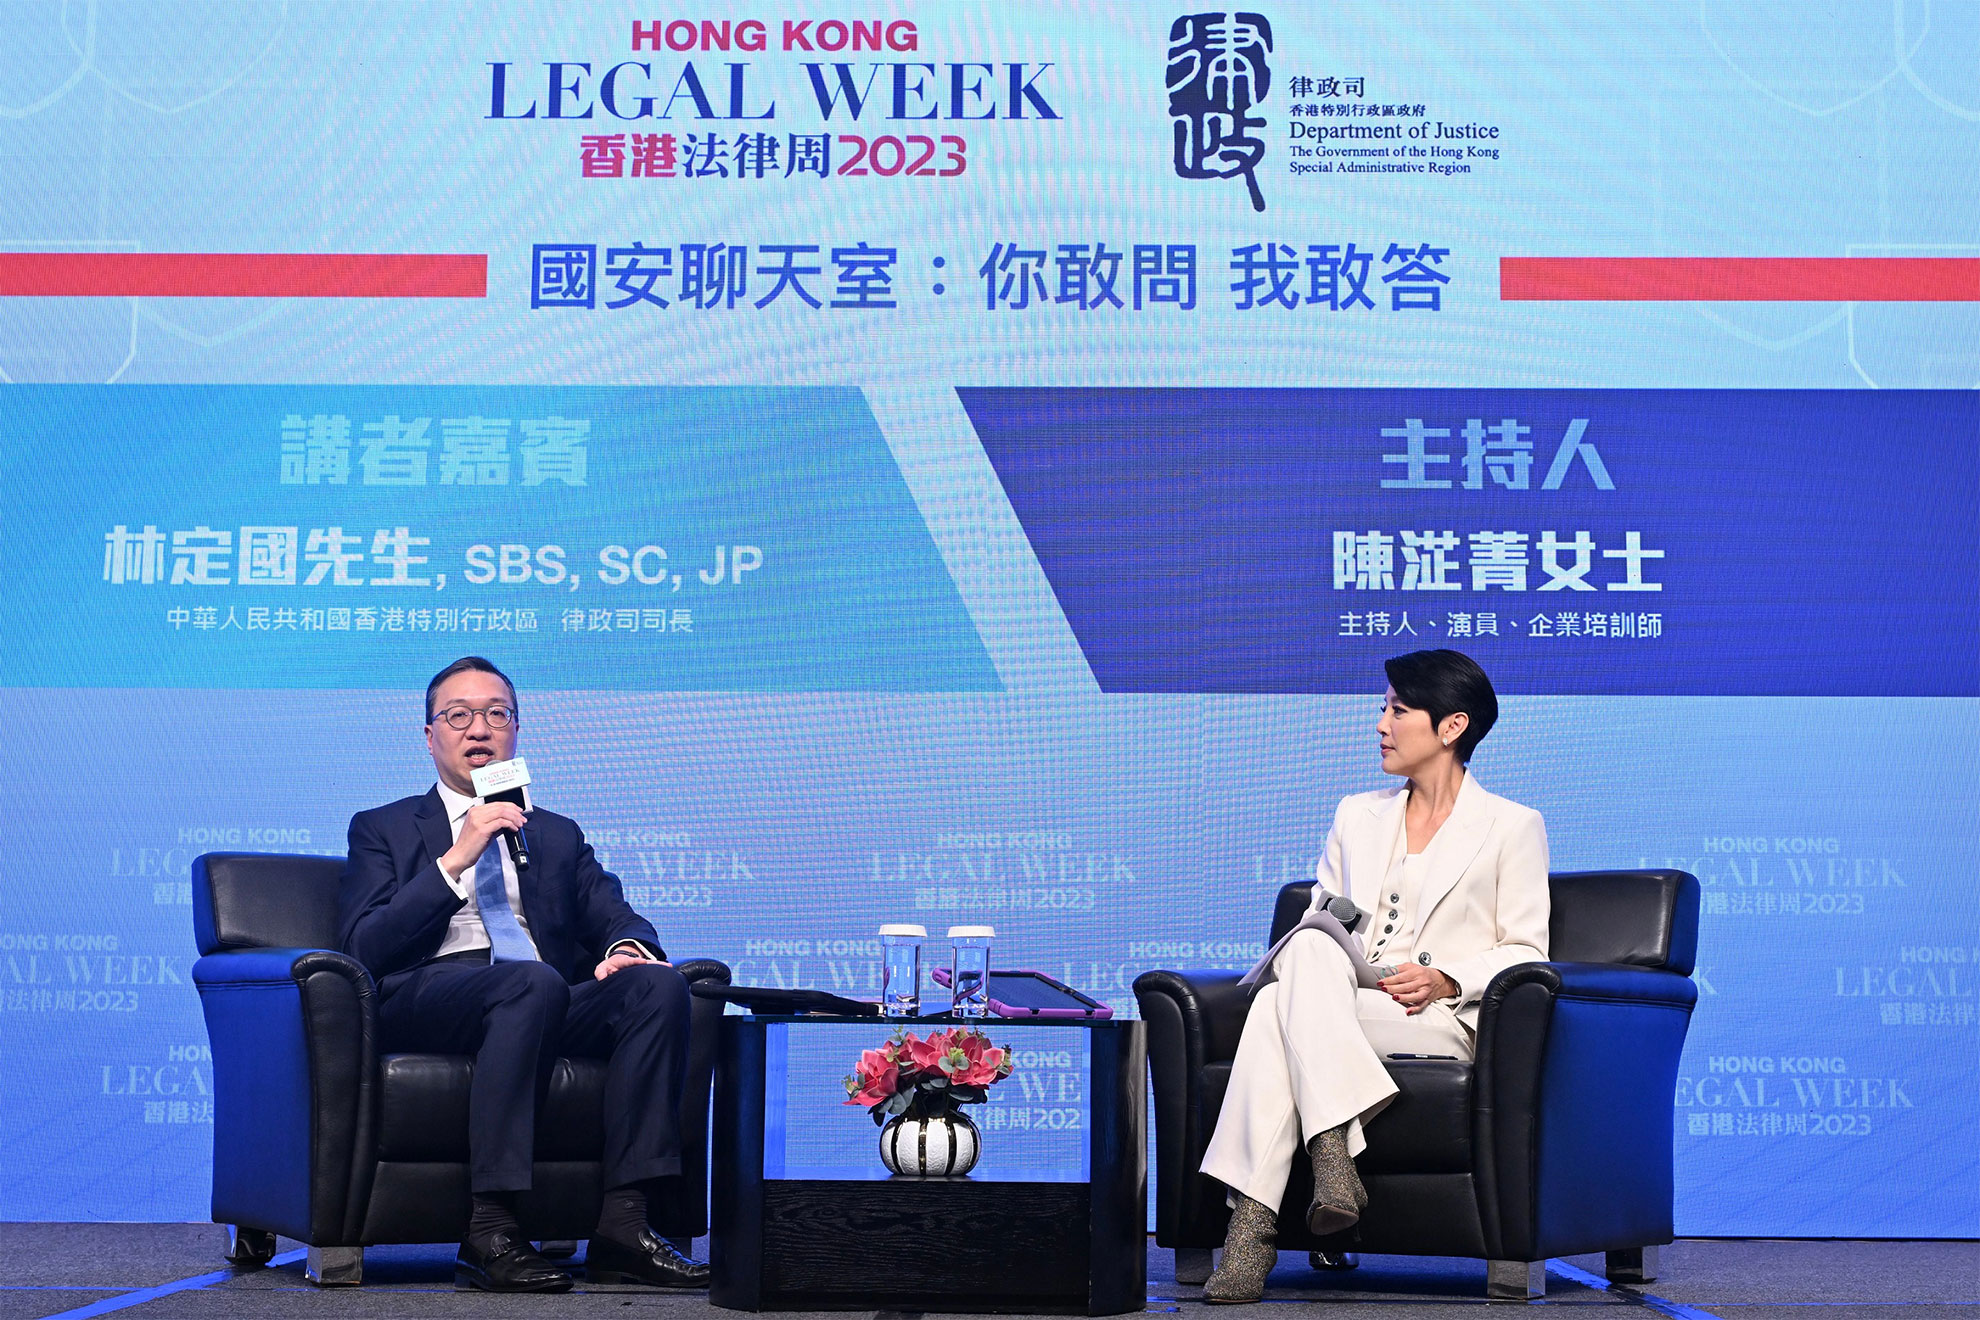 Hong Kong Legal Week 2023, an annual flagship event of the legal sector and the Department of Justice, successfully concluded today (November 10). Photo shows the Secretary for Justice, Mr Paul Lam, SC (left), and emcee Astrid Chan (right) at the National Security Chatroom: “You ask, I answer” at the Rule of Law for the Future.